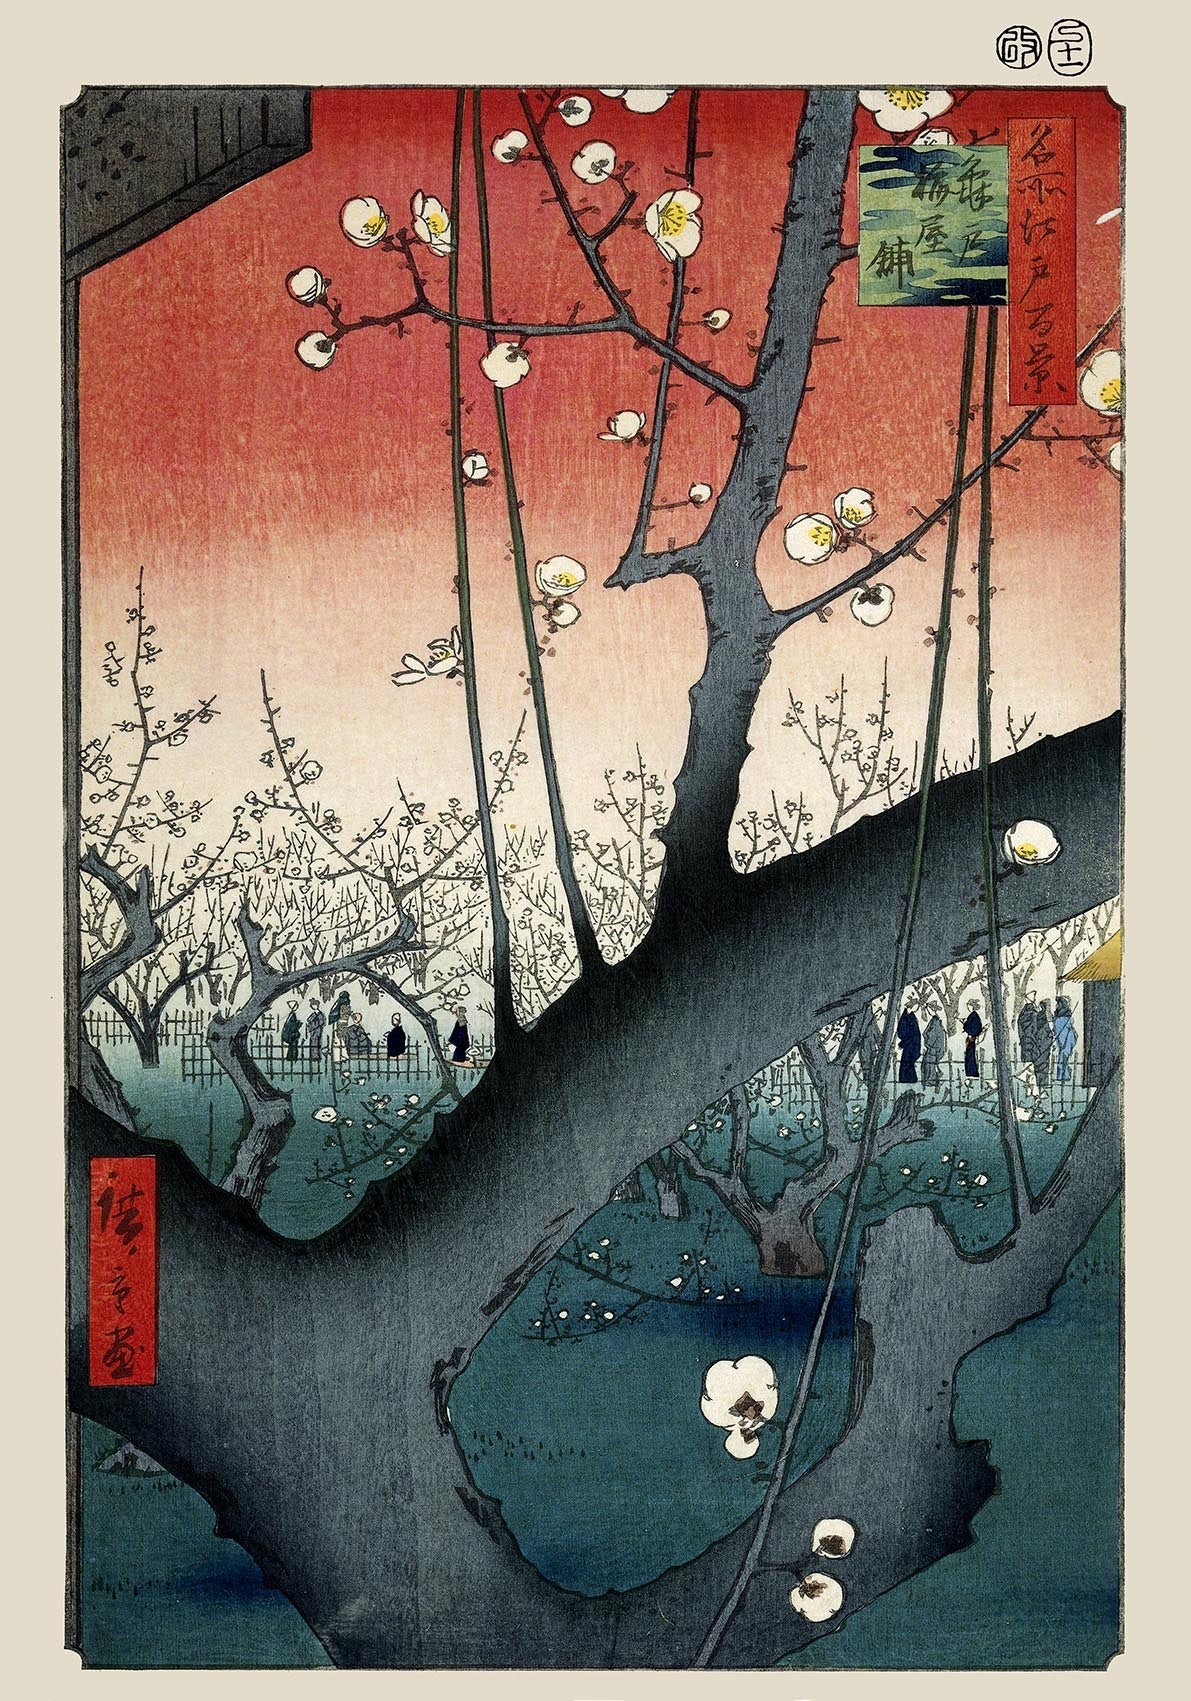 The Plum Orchard at Kameido by Hiroshige